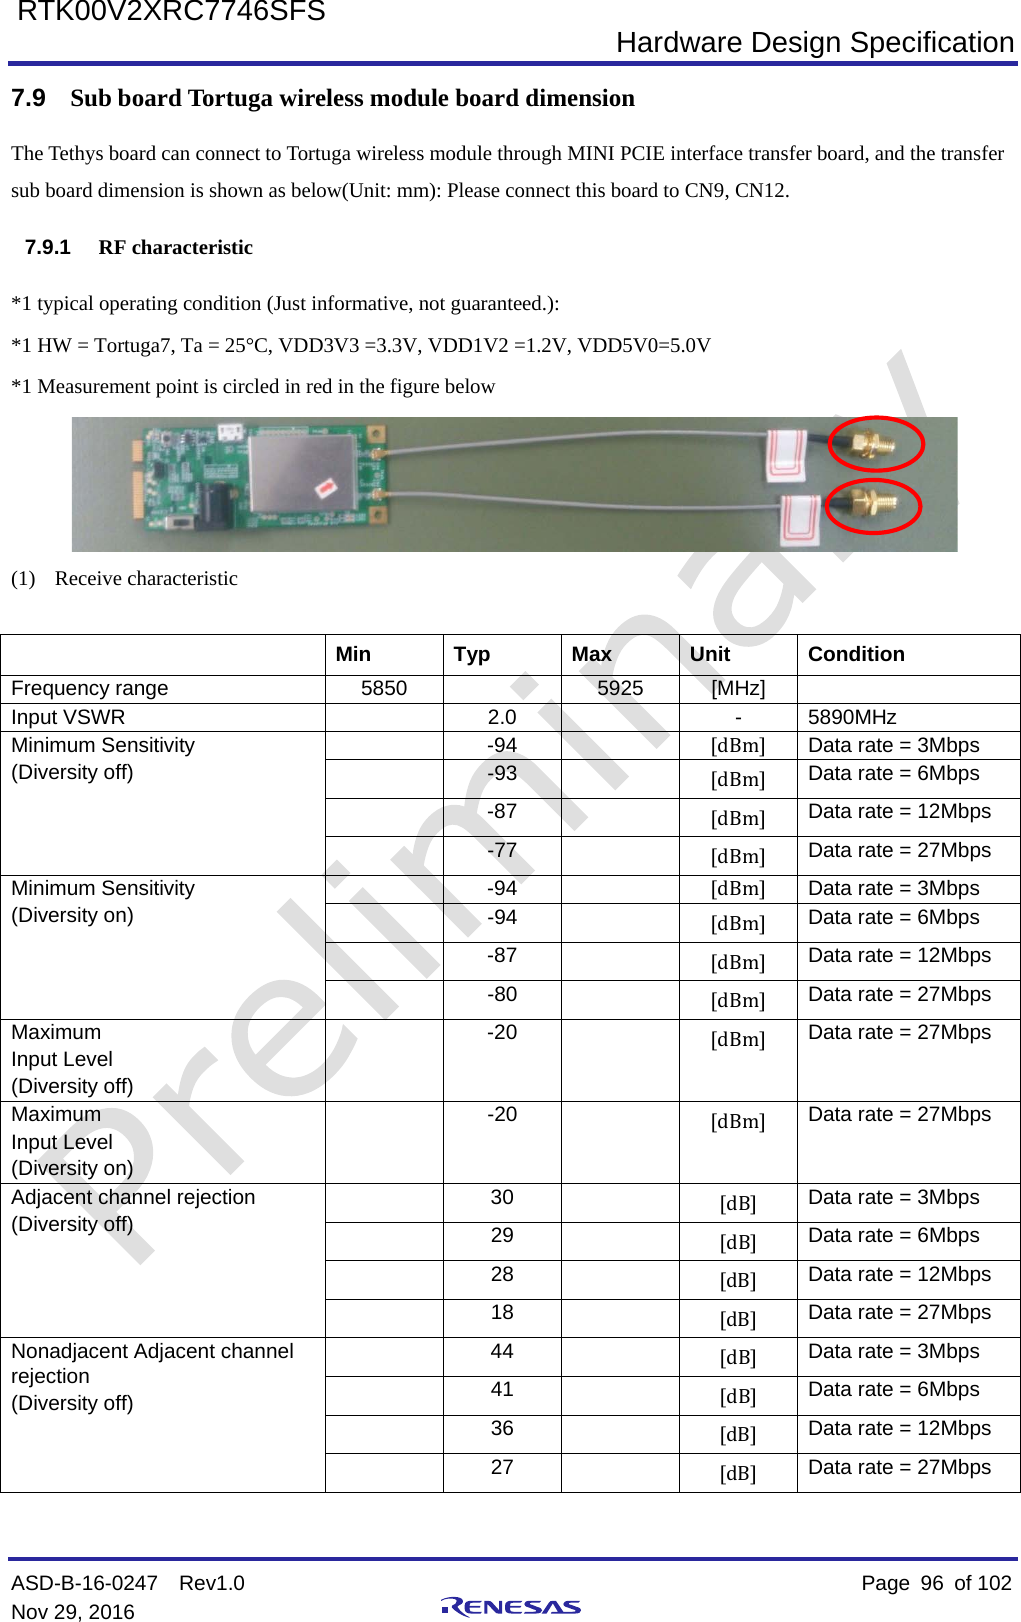  Hardware Design Specification ASD-B-16-0247  Rev1.0    Page  96 of 102 Nov 29, 2016     RTK00V2XRC7746SFS 7.9 Sub board Tortuga wireless module board dimension The Tethys board can connect to Tortuga wireless module through MINI PCIE interface transfer board, and the transfer sub board dimension is shown as below(Unit: mm): Please connect this board to CN9, CN12. 7.9.1 RF characteristic *1 typical operating condition (Just informative, not guaranteed.): *1 HW = Tortuga7, Ta = 25°C, VDD3V3 =3.3V, VDD1V2 =1.2V, VDD5V0=5.0V *1 Measurement point is circled in red in the figure below  (1) Receive characteristic   Min Typ Max Unit  Condition Frequency range 5850    5925 [MHz]   Input VSWR  2.0  - 5890MHz Minimum Sensitivity (Diversity off)   -94   [dBm] Data rate = 3Mbps  -93  [dBm] Data rate = 6Mbps   -87   [dBm] Data rate = 12Mbps  -77  [dBm] Data rate = 27Mbps Minimum Sensitivity (Diversity on)   -94   [dBm] Data rate = 3Mbps  -94  [dBm] Data rate = 6Mbps   -87   [dBm] Data rate = 12Mbps  -80  [dBm] Data rate = 27Mbps Maximum   Input Level   (Diversity off)   -20   [dBm] Data rate = 27Mbps Maximum   Input Level   (Diversity on)  -20  [dBm] Data rate = 27Mbps Adjacent channel rejection (Diversity off)  30   [dB] Data rate = 3Mbps  29  [dB] Data rate = 6Mbps  28   [dB] Data rate = 12Mbps  18  [dB] Data rate = 27Mbps Nonadjacent Adjacent channel rejection (Diversity off)  44   [dB] Data rate = 3Mbps  41  [dB] Data rate = 6Mbps  36   [dB] Data rate = 12Mbps  27  [dB] Data rate = 27Mbps    